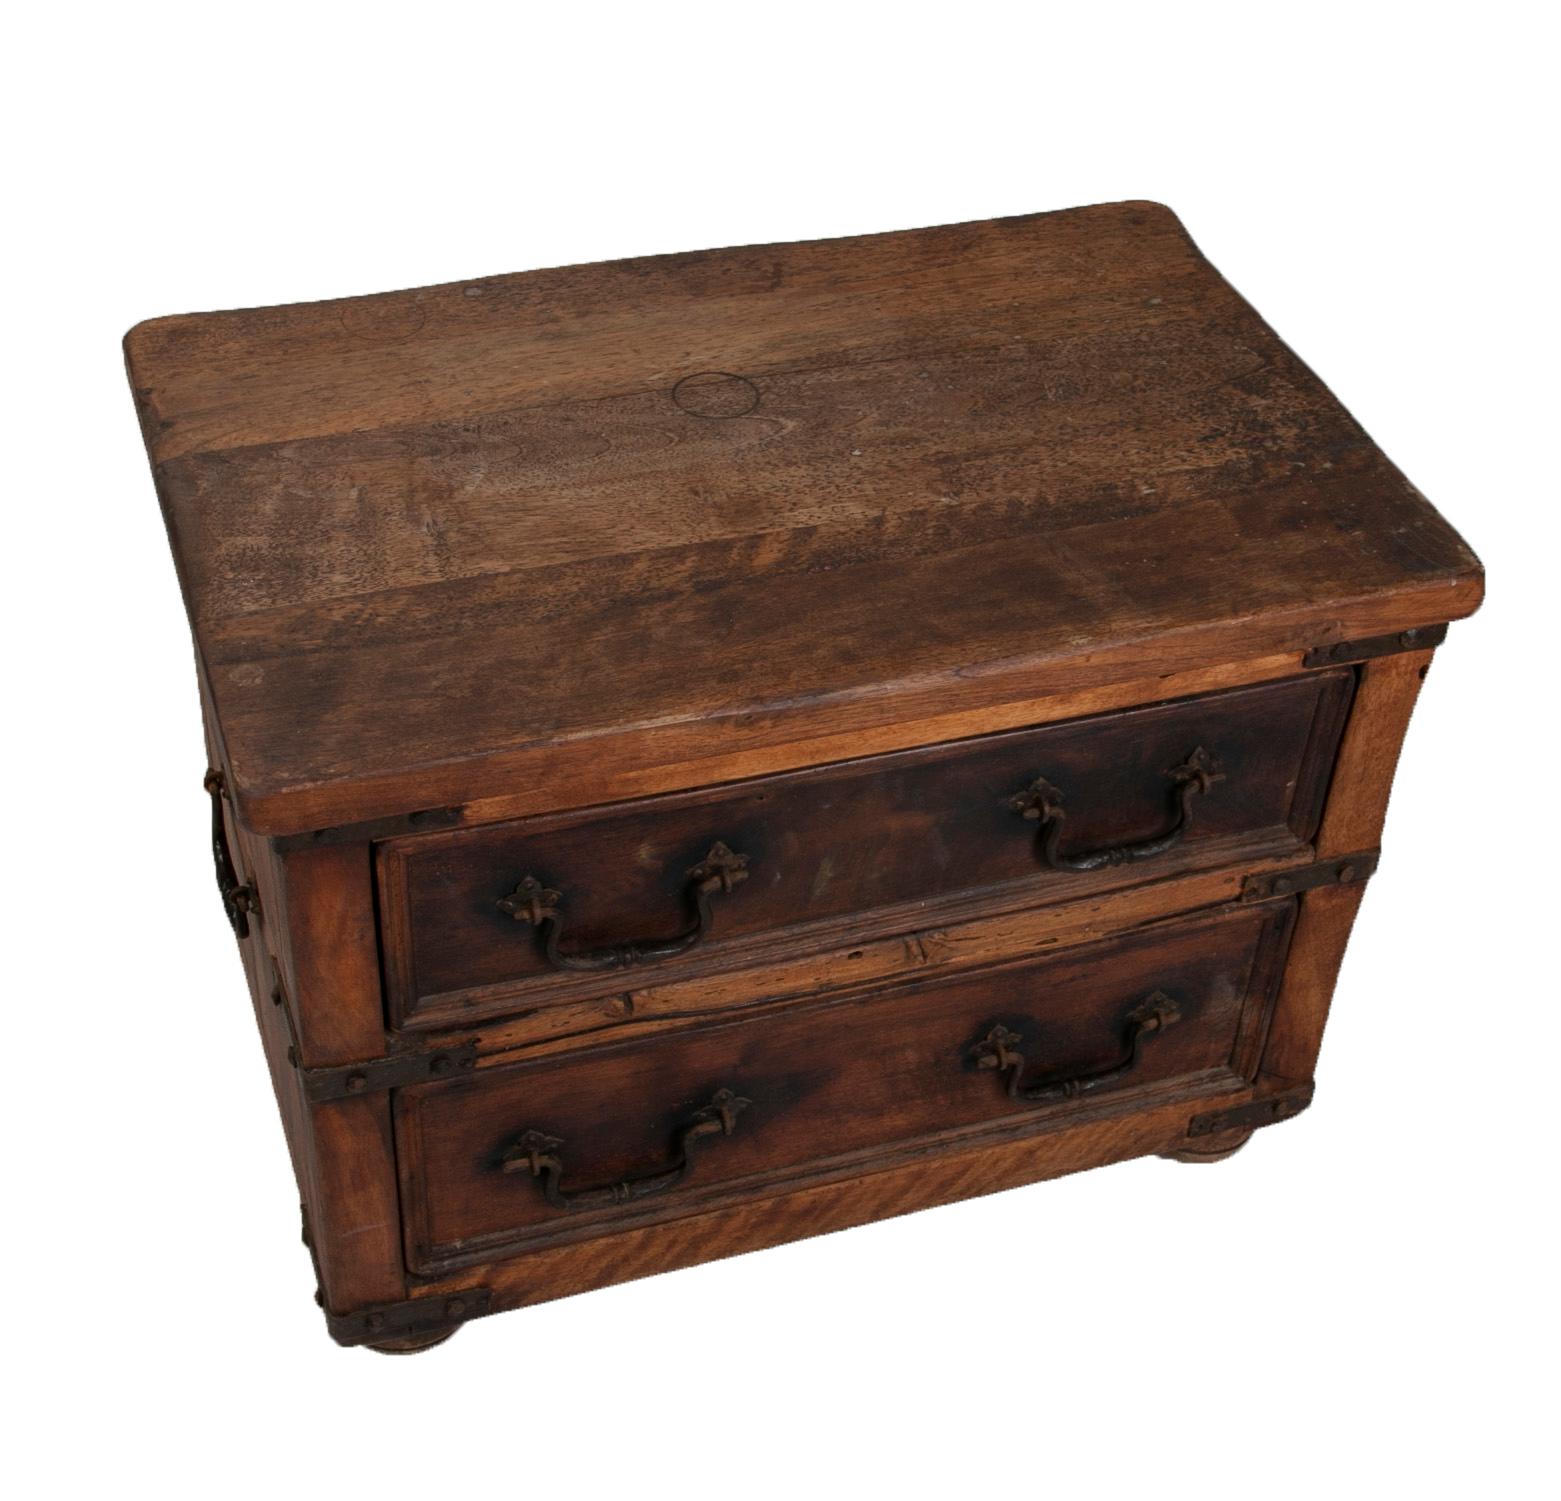 Cabinet with two wooden drawers with handles and iron reinforcements.